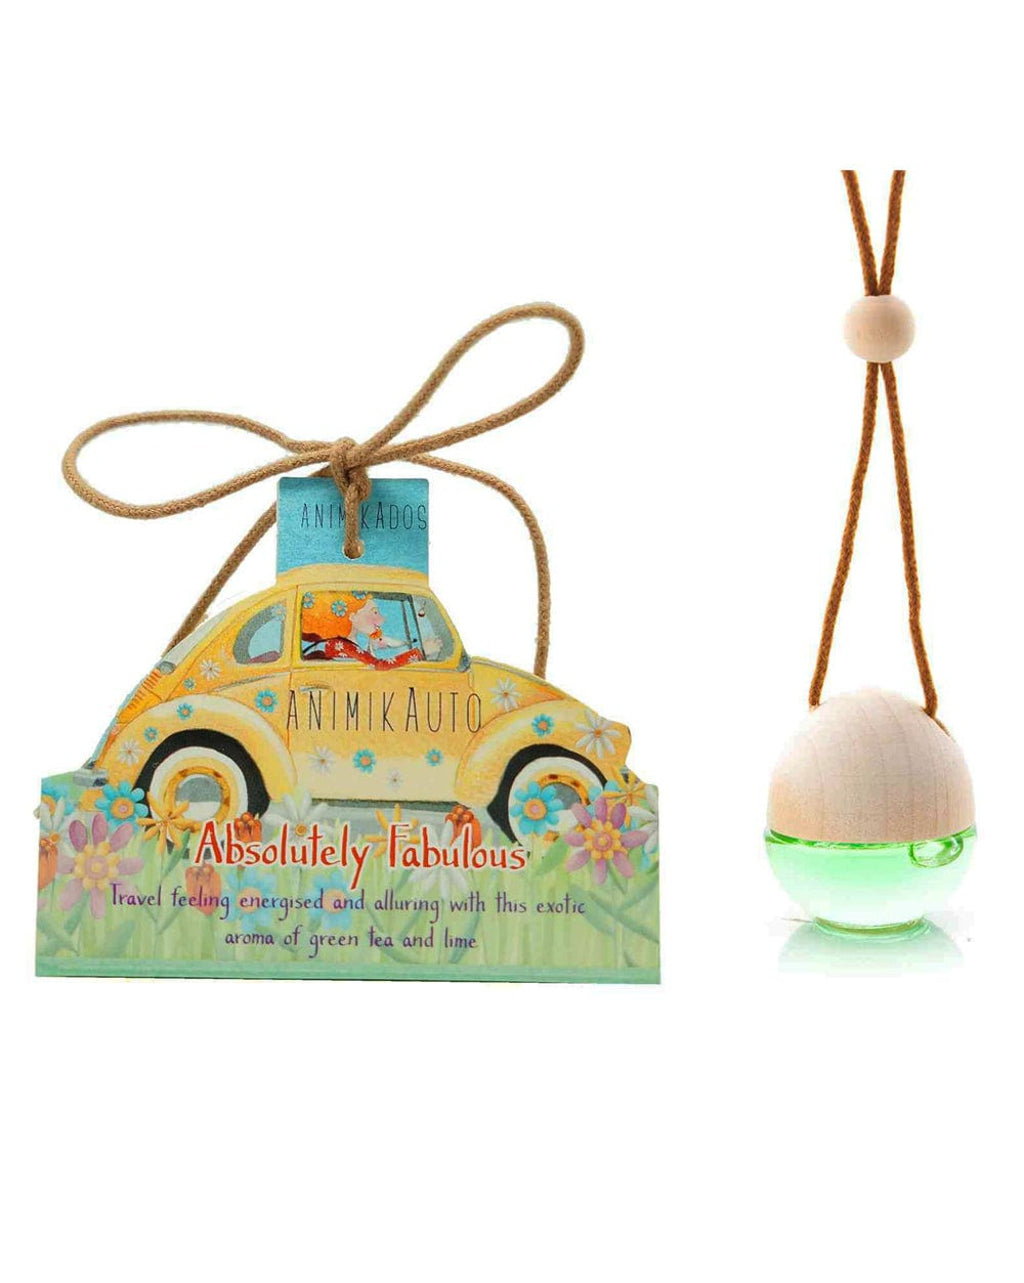 Absolutely Fabulous - Green Tea & Lime Car Freshener from our Air Fresheners collection by Profile Products Australia